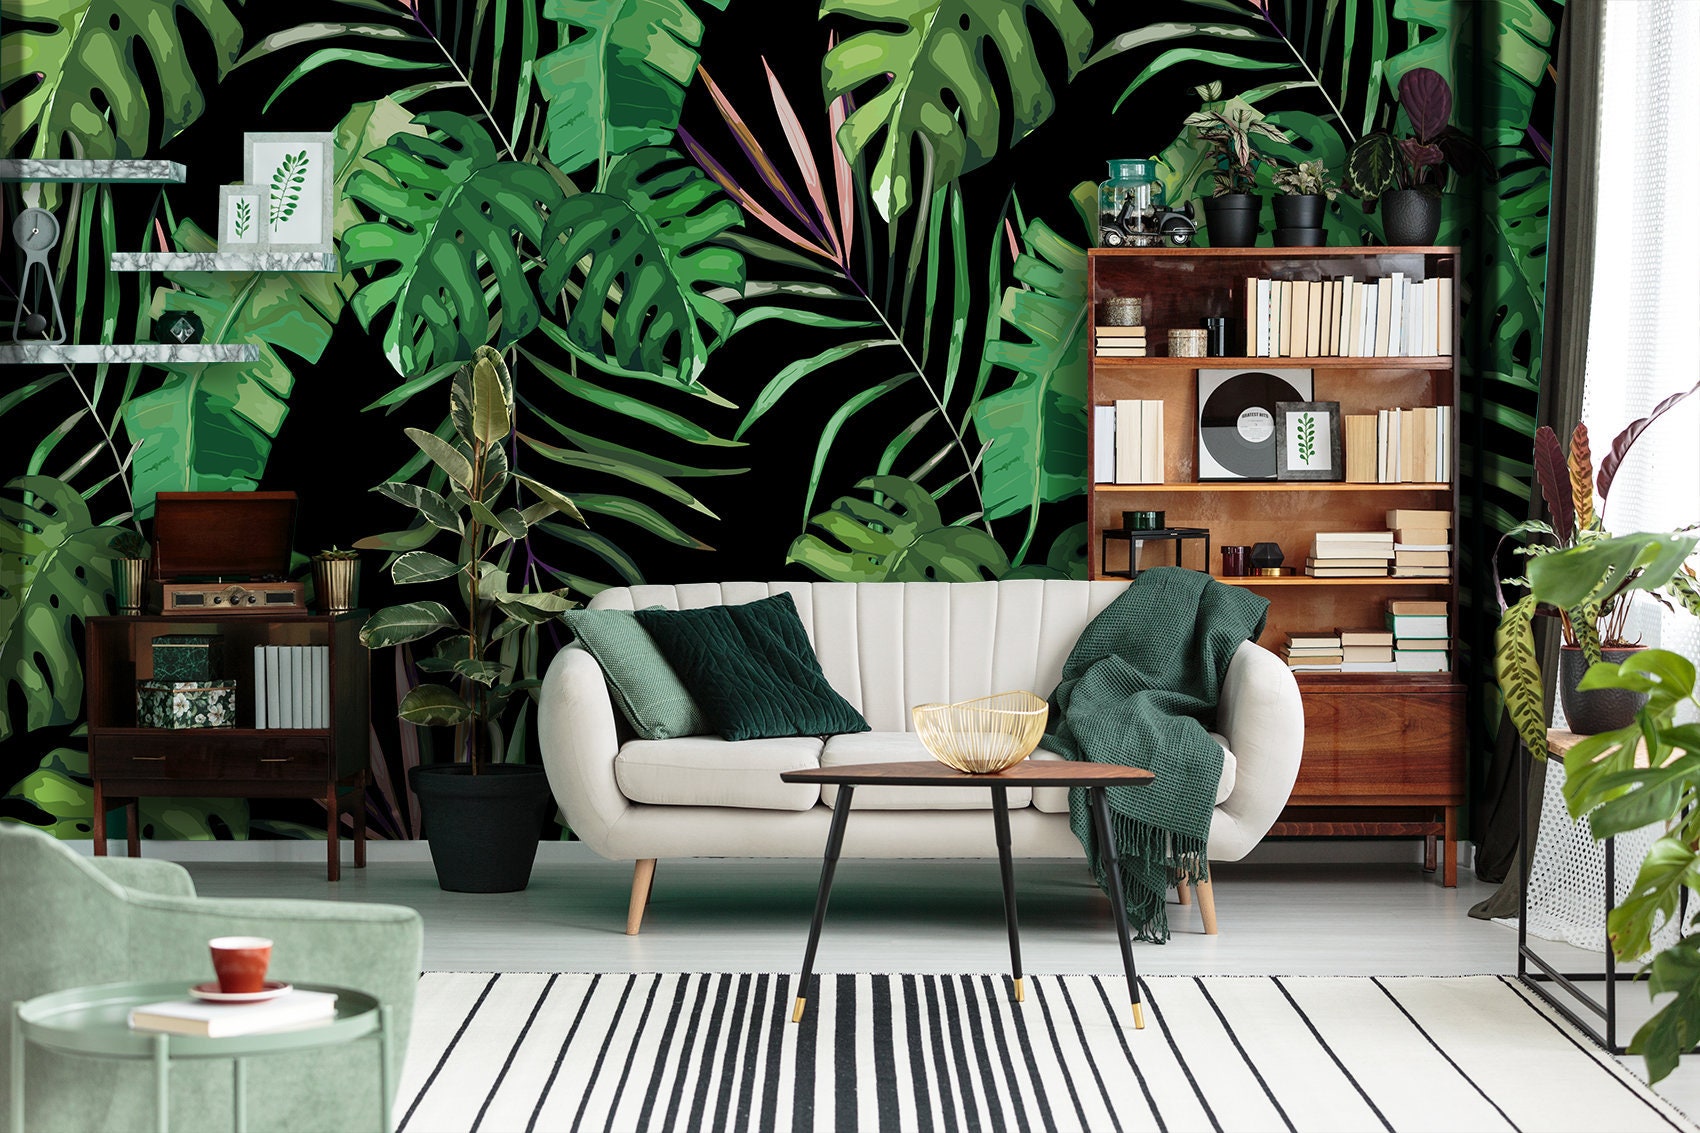 Dark Jungle Wallpaper Peel And Stick Tropical Removable Wall